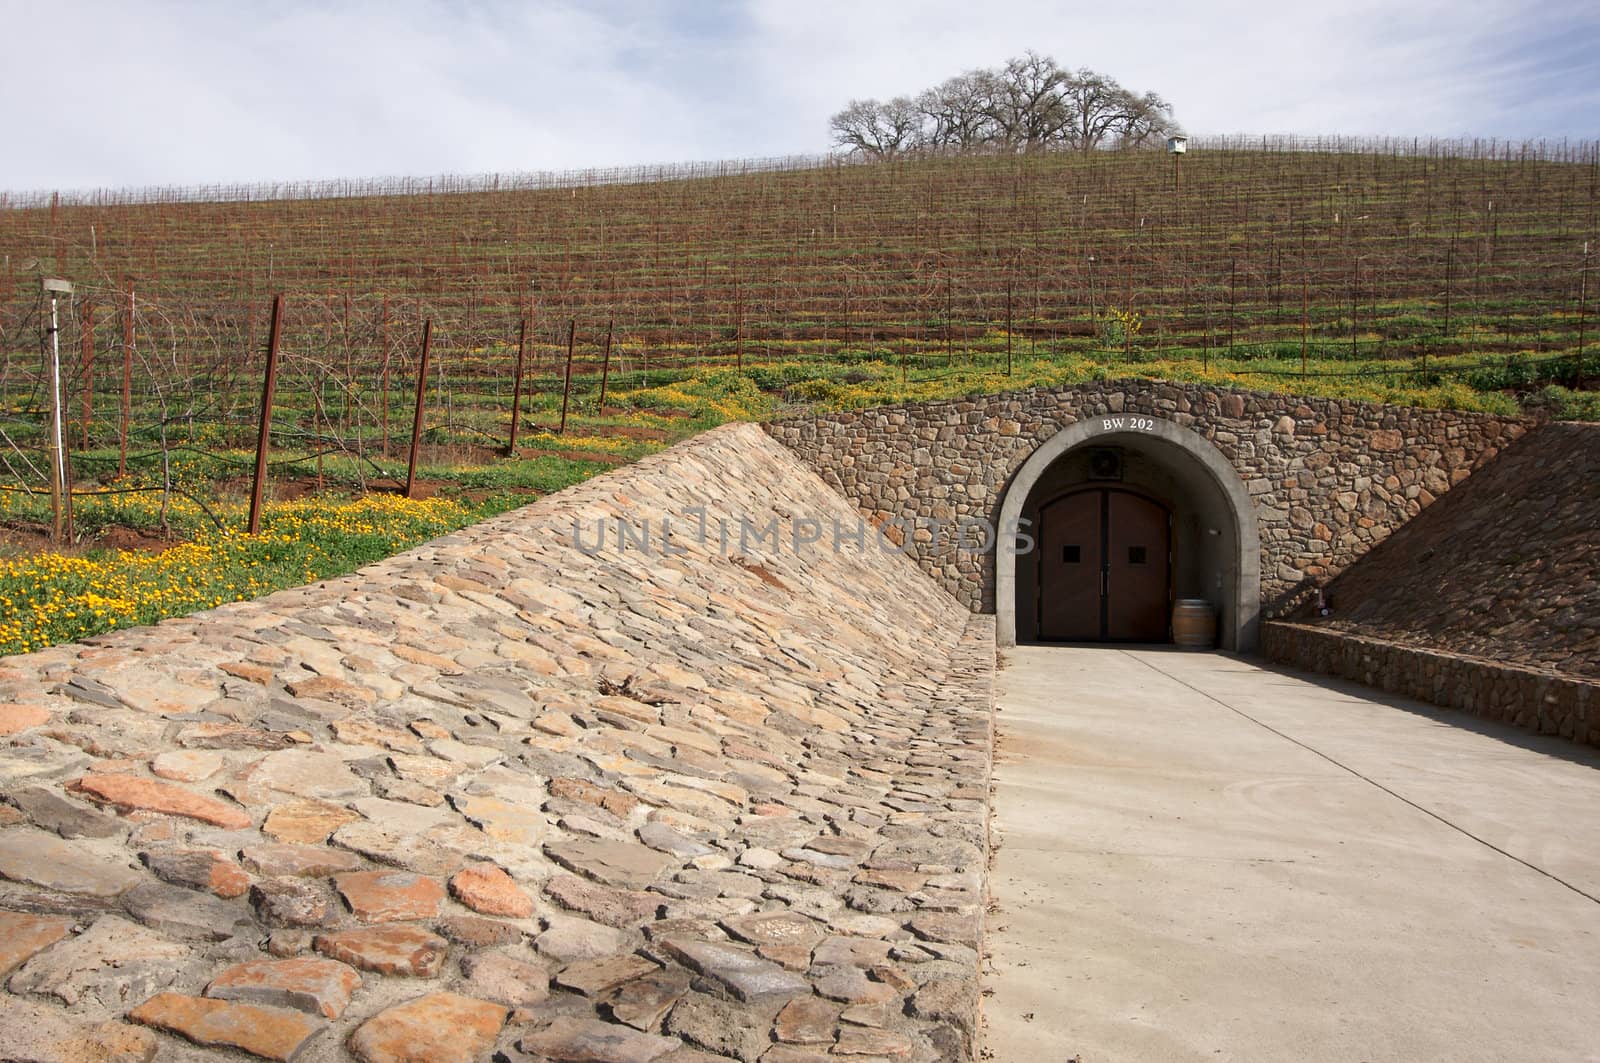 Vineyard hillside, Cellar Entryway and lone trees on an early spring day.